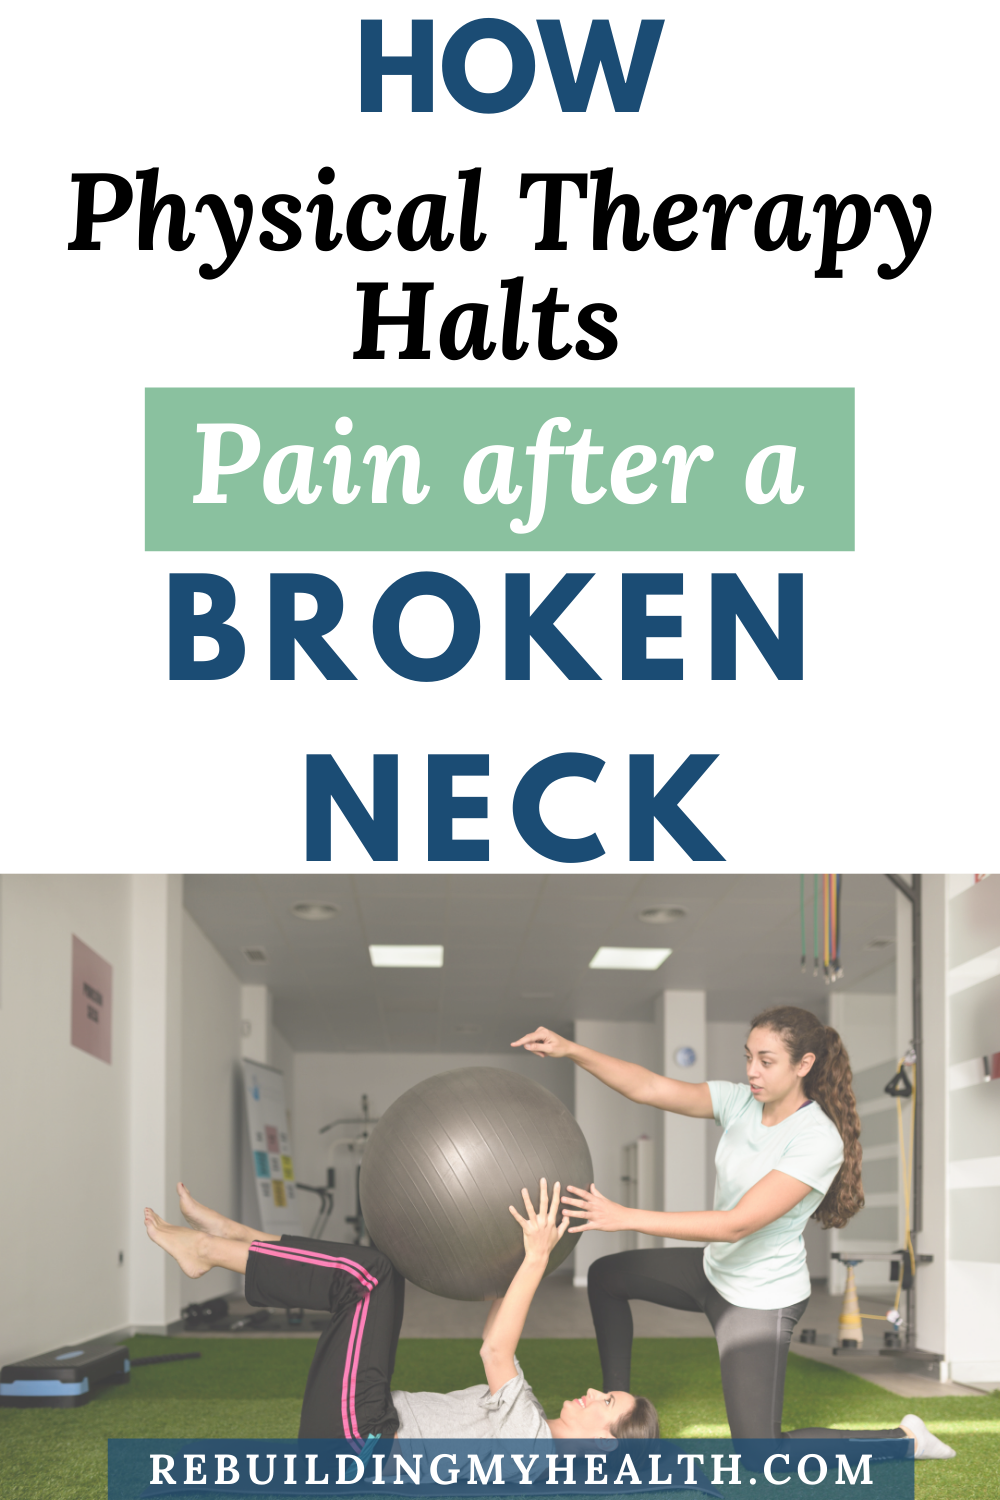 After her brace came off, Sarah had lingering pain after a broken neck. Physical therapy immediately eliminated her pain and kept it away.